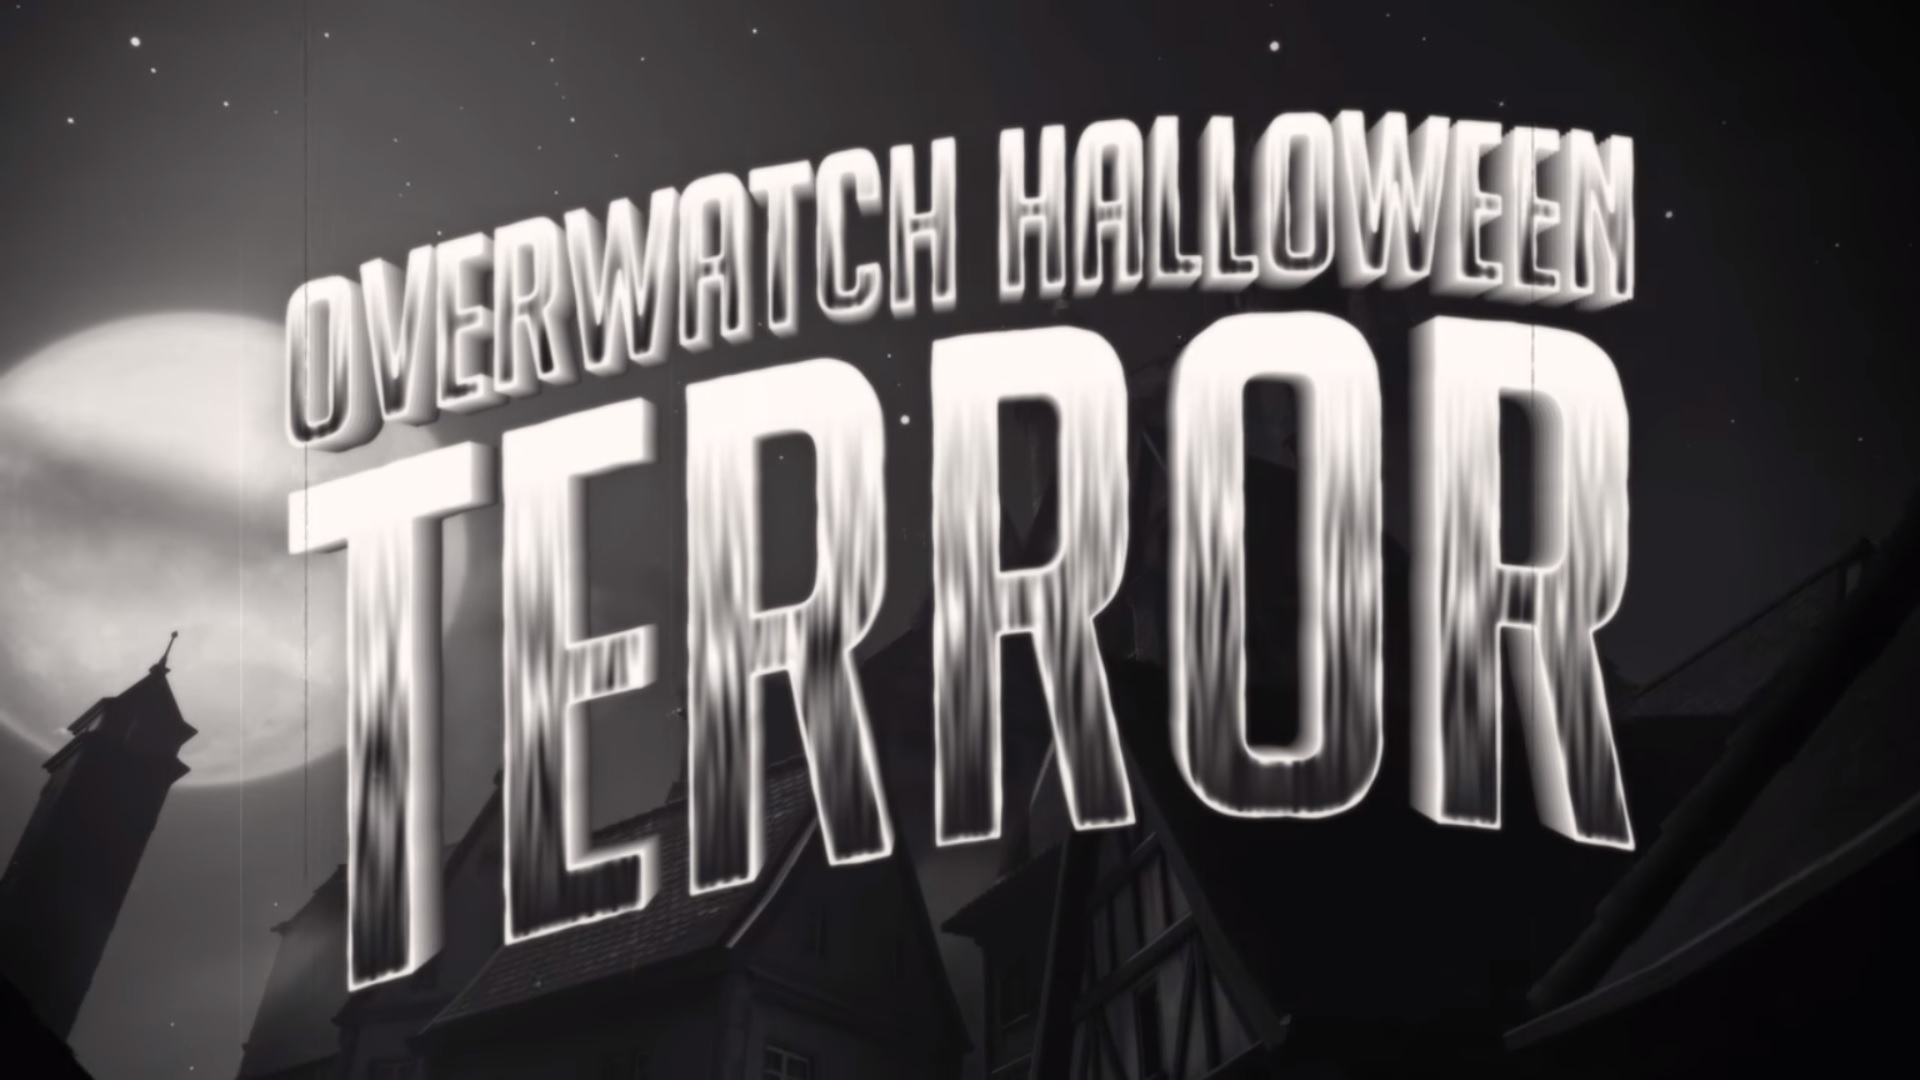 Overwatch Halloween Terror Updates Introduce New Lootboxes, Skins and More!